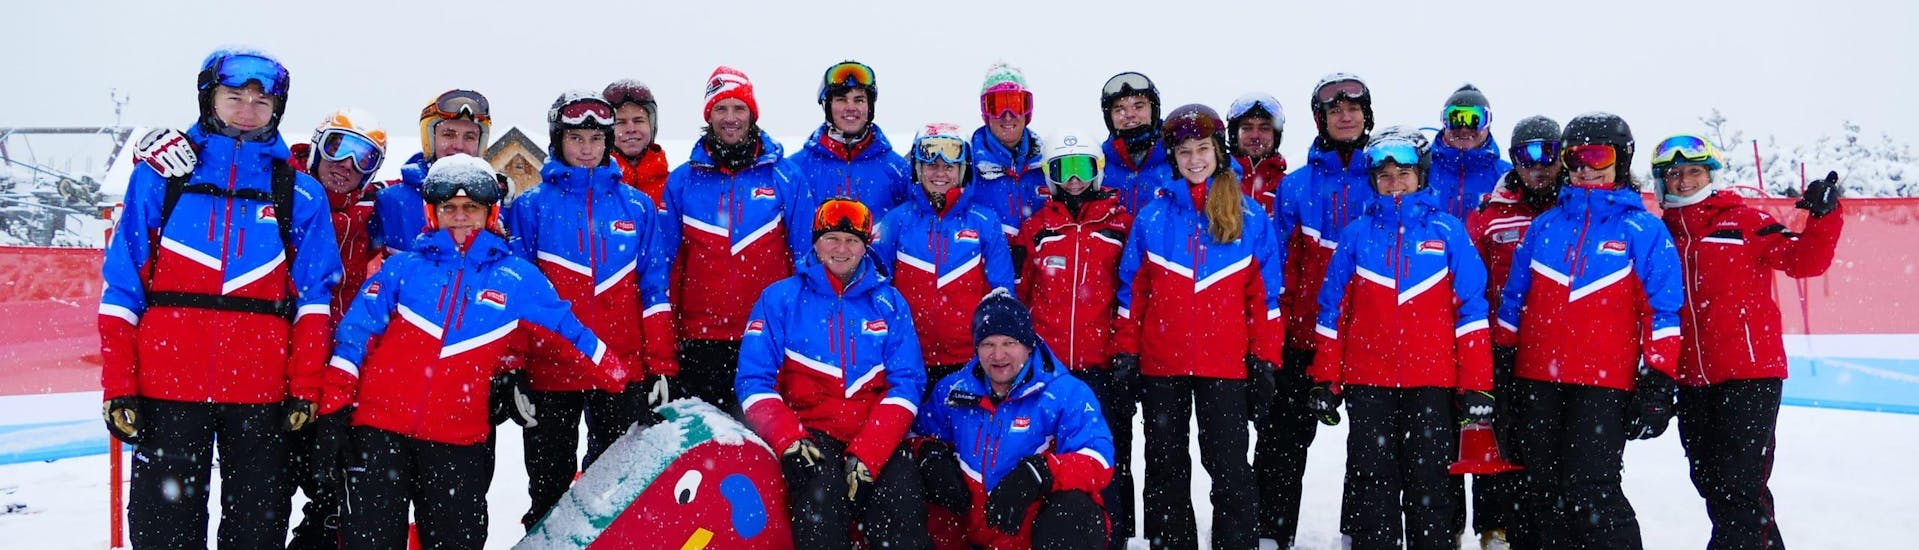 The ski instructors of Skischule Klostertal are smiling into the camera while they are taking a picture.